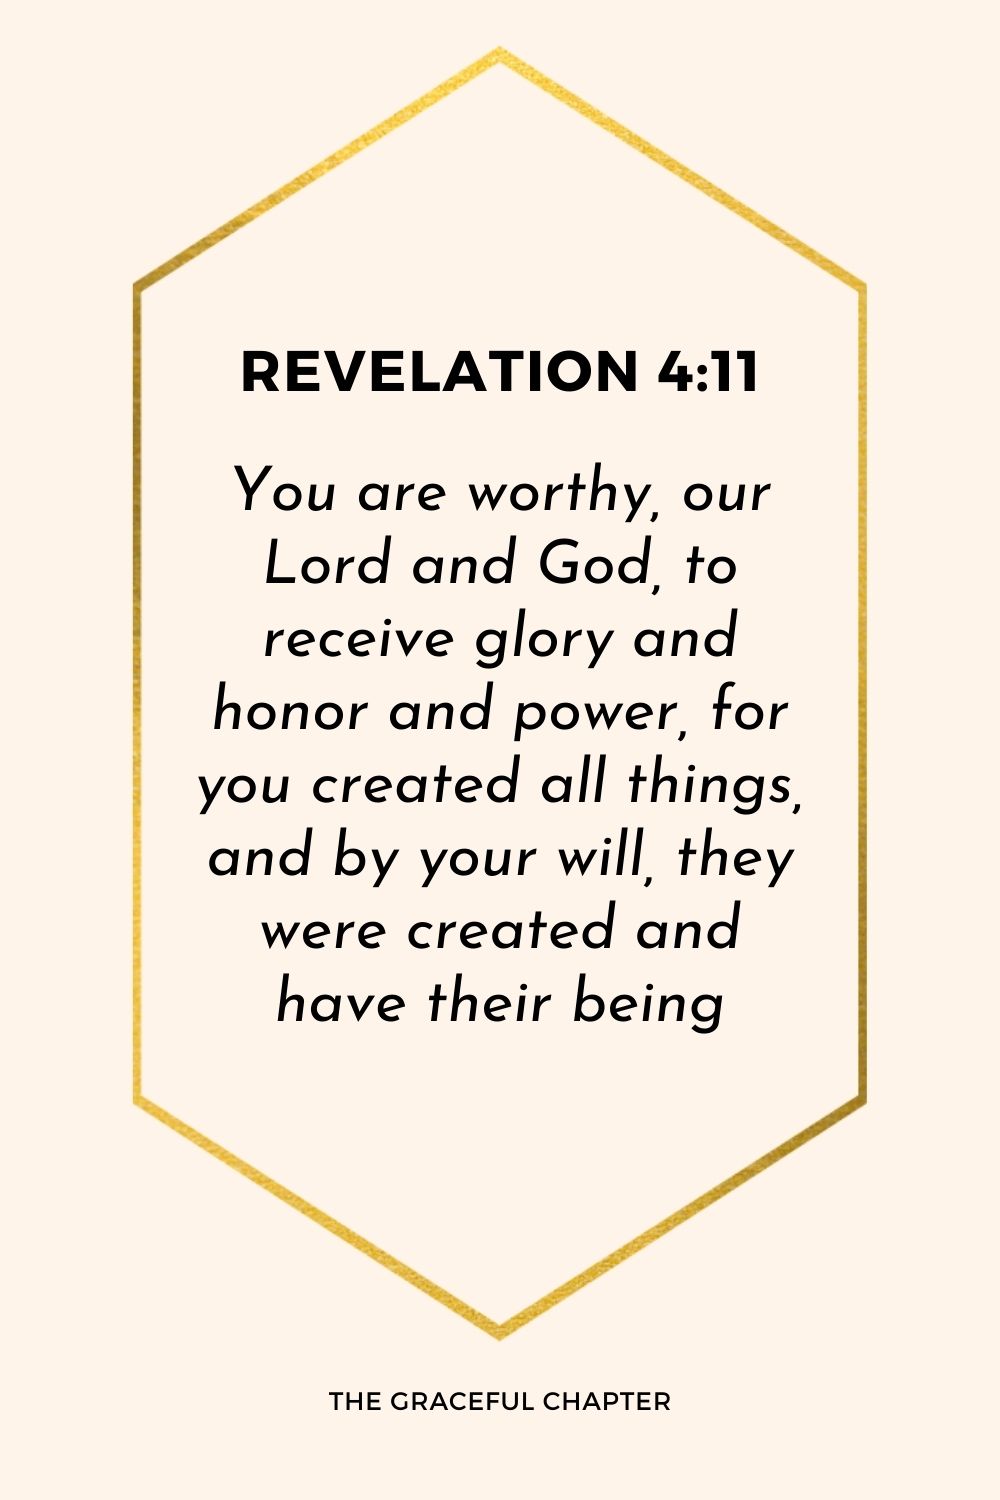 You are worthy, our Lord and God, to receive glory and honor and power, for you created all things, and by your will, they were created and have their being